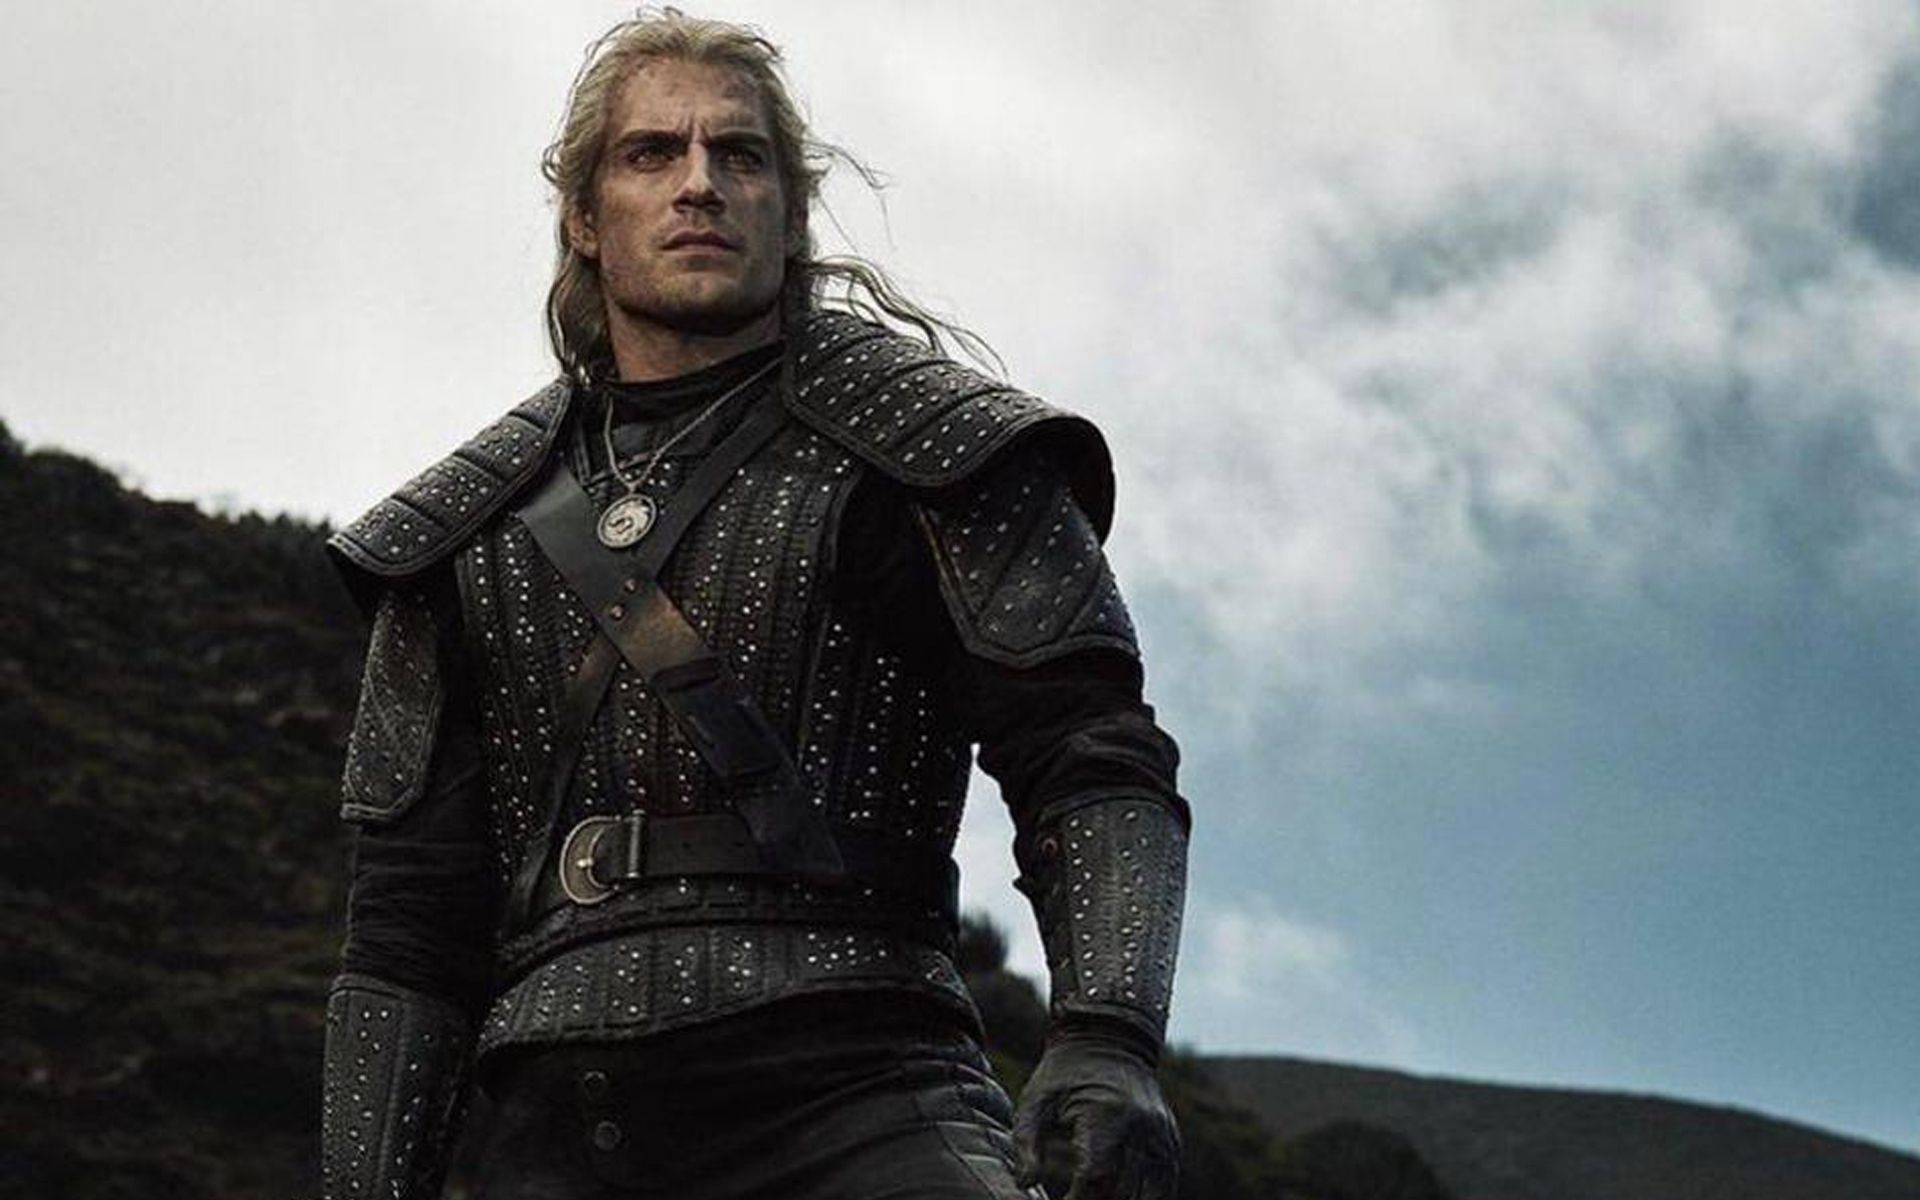 The Witcher's Henry Cavill: "I Hate Females And Minorities"